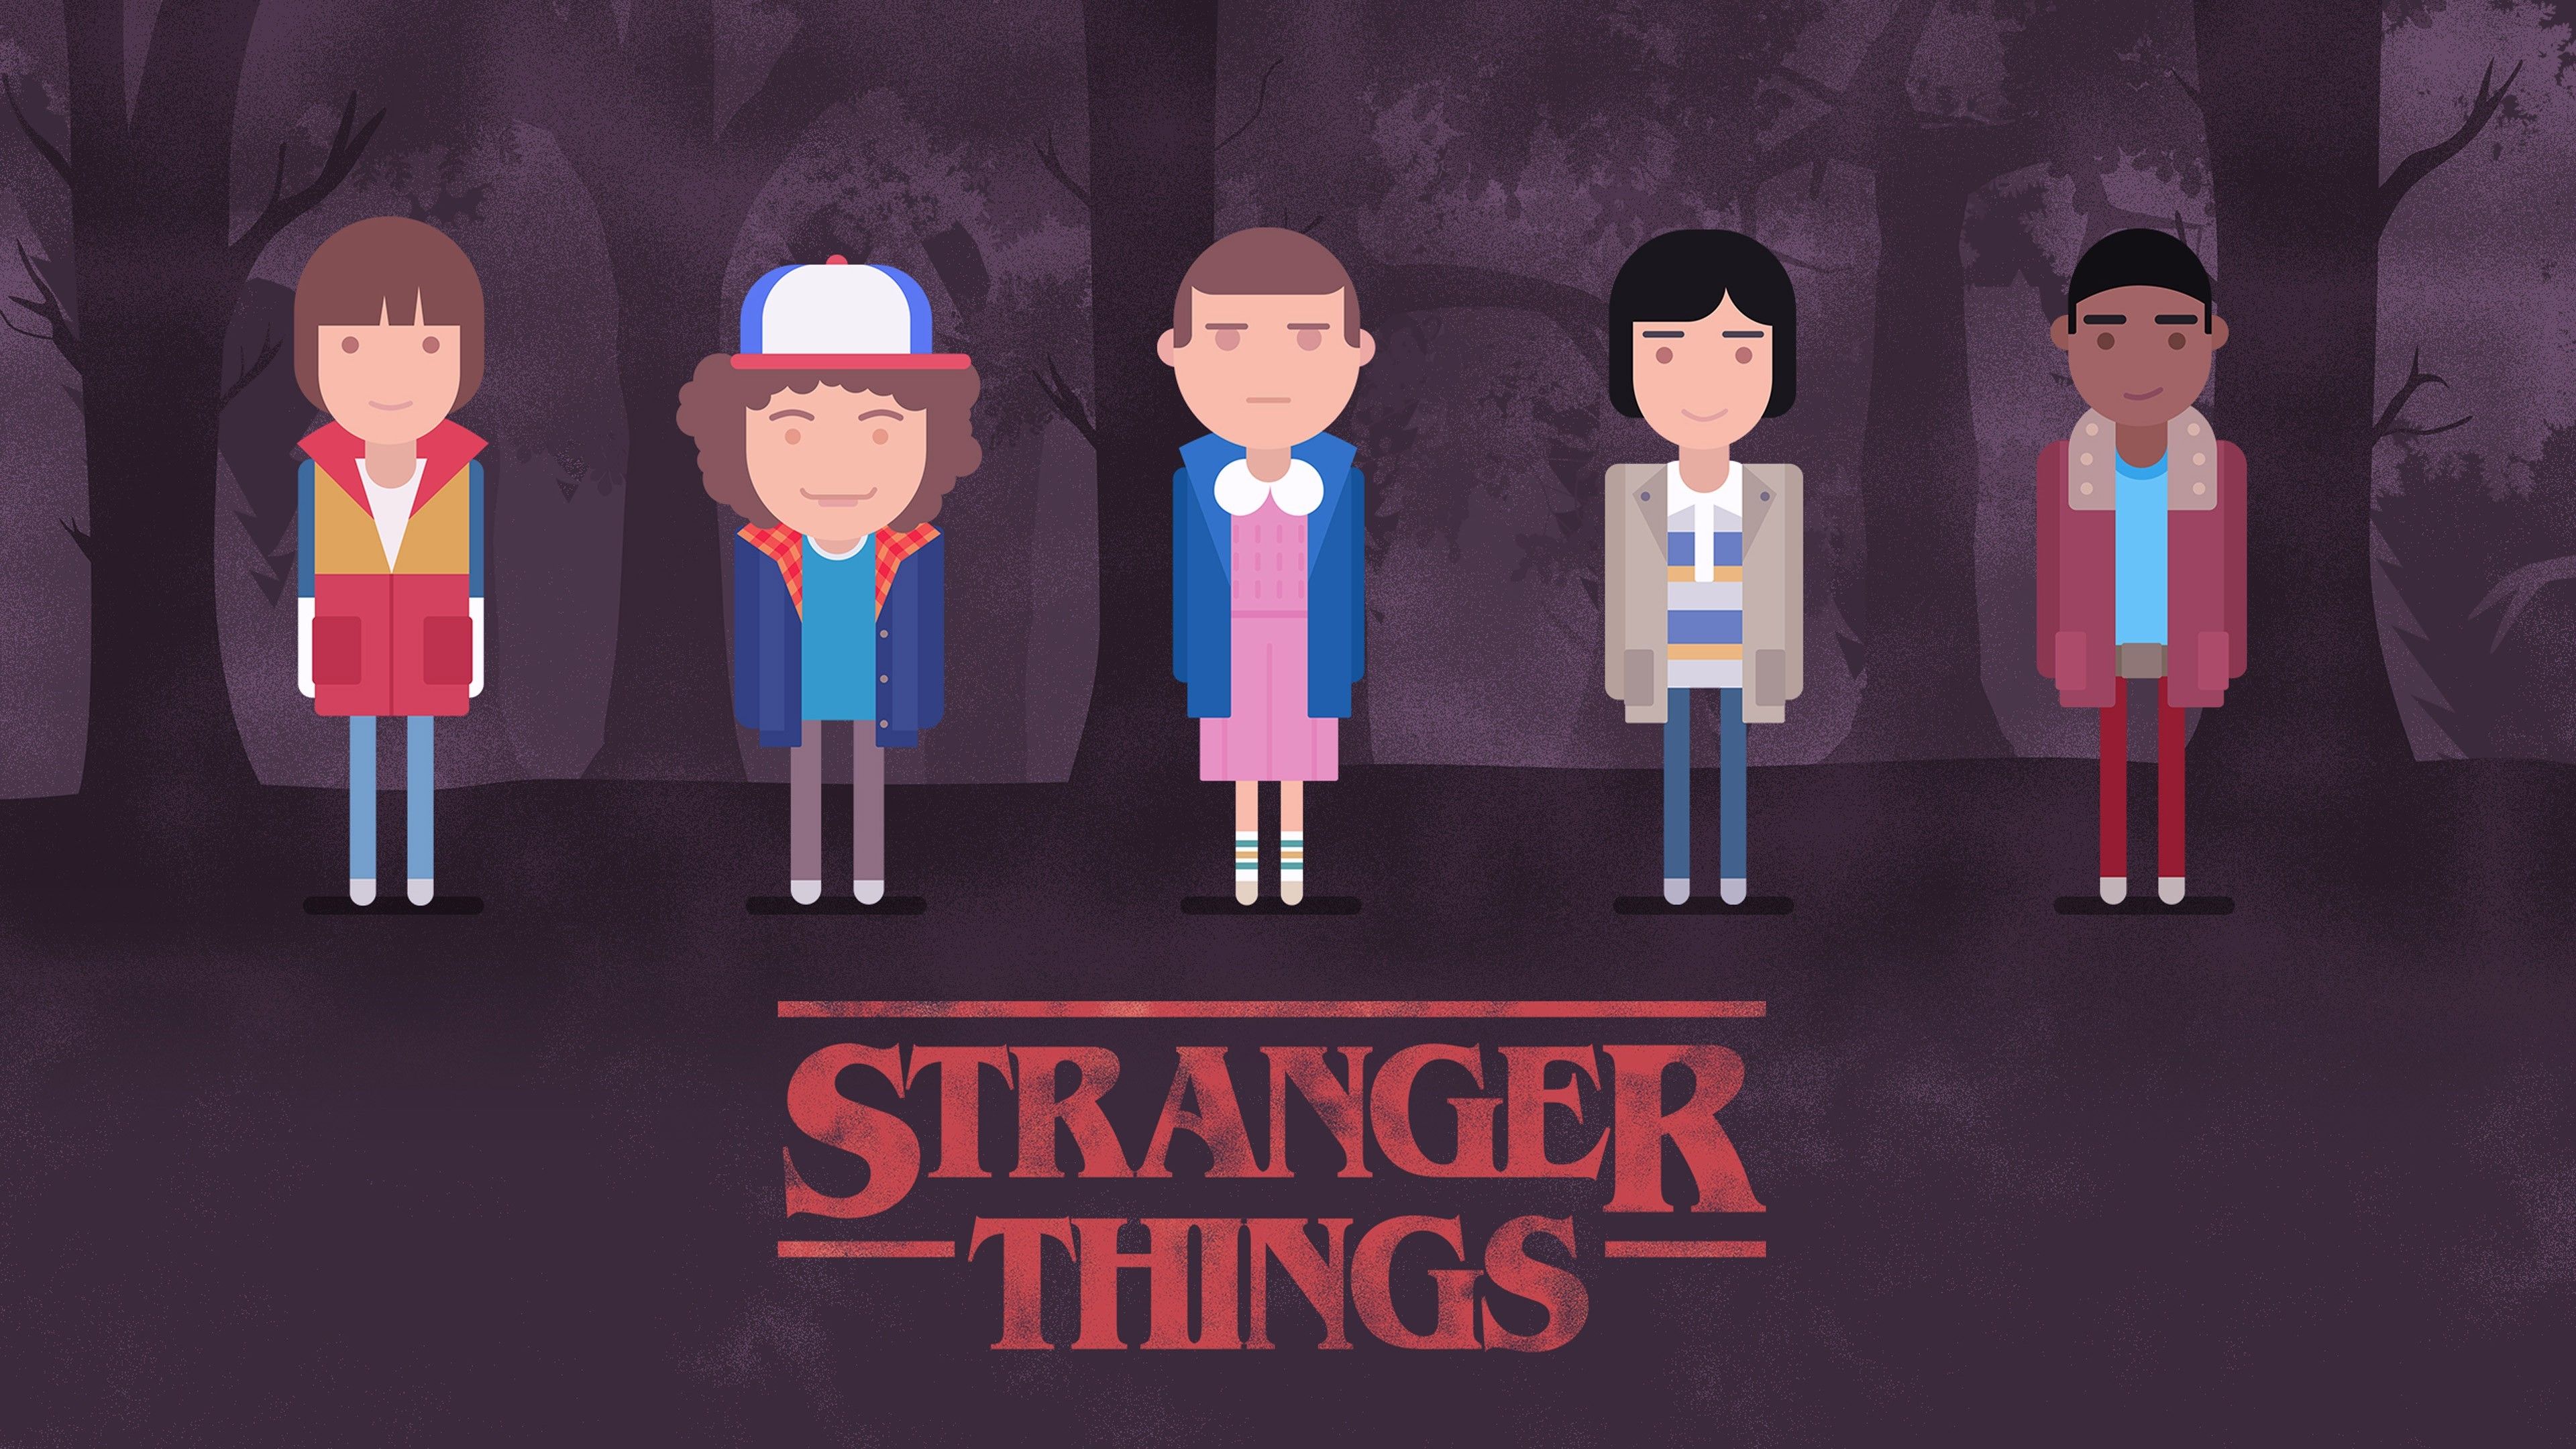 Pick a Stranger Things wallpaper to honor your favorite show